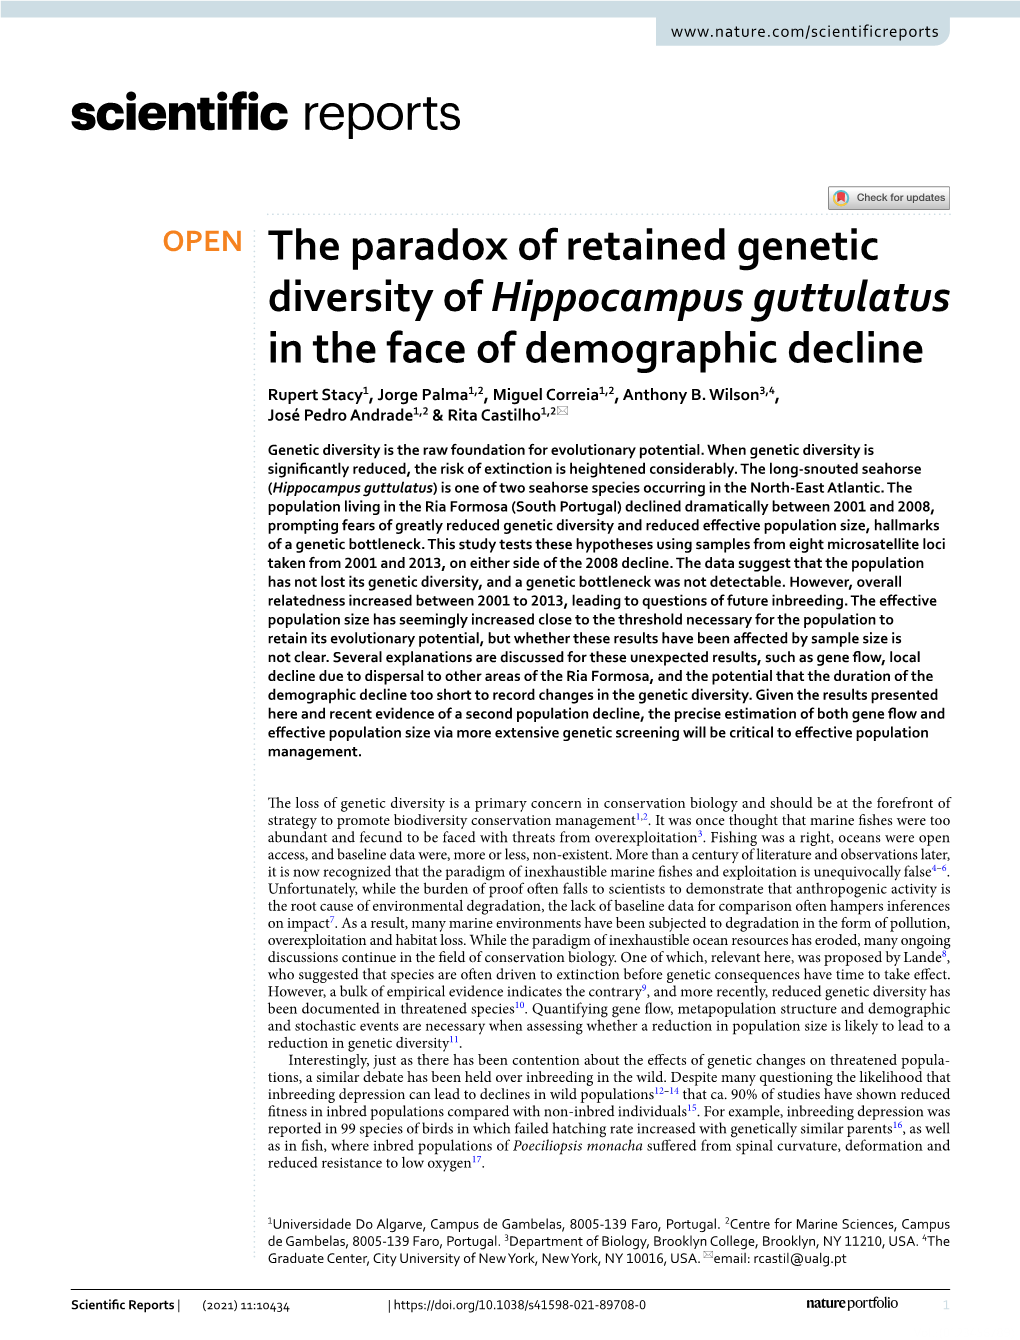 The Paradox of Retained Genetic Diversity of Hippocampus Guttulatus in the Face of Demographic Decline Rupert Stacy1, Jorge Palma1,2, Miguel Correia1,2, Anthony B